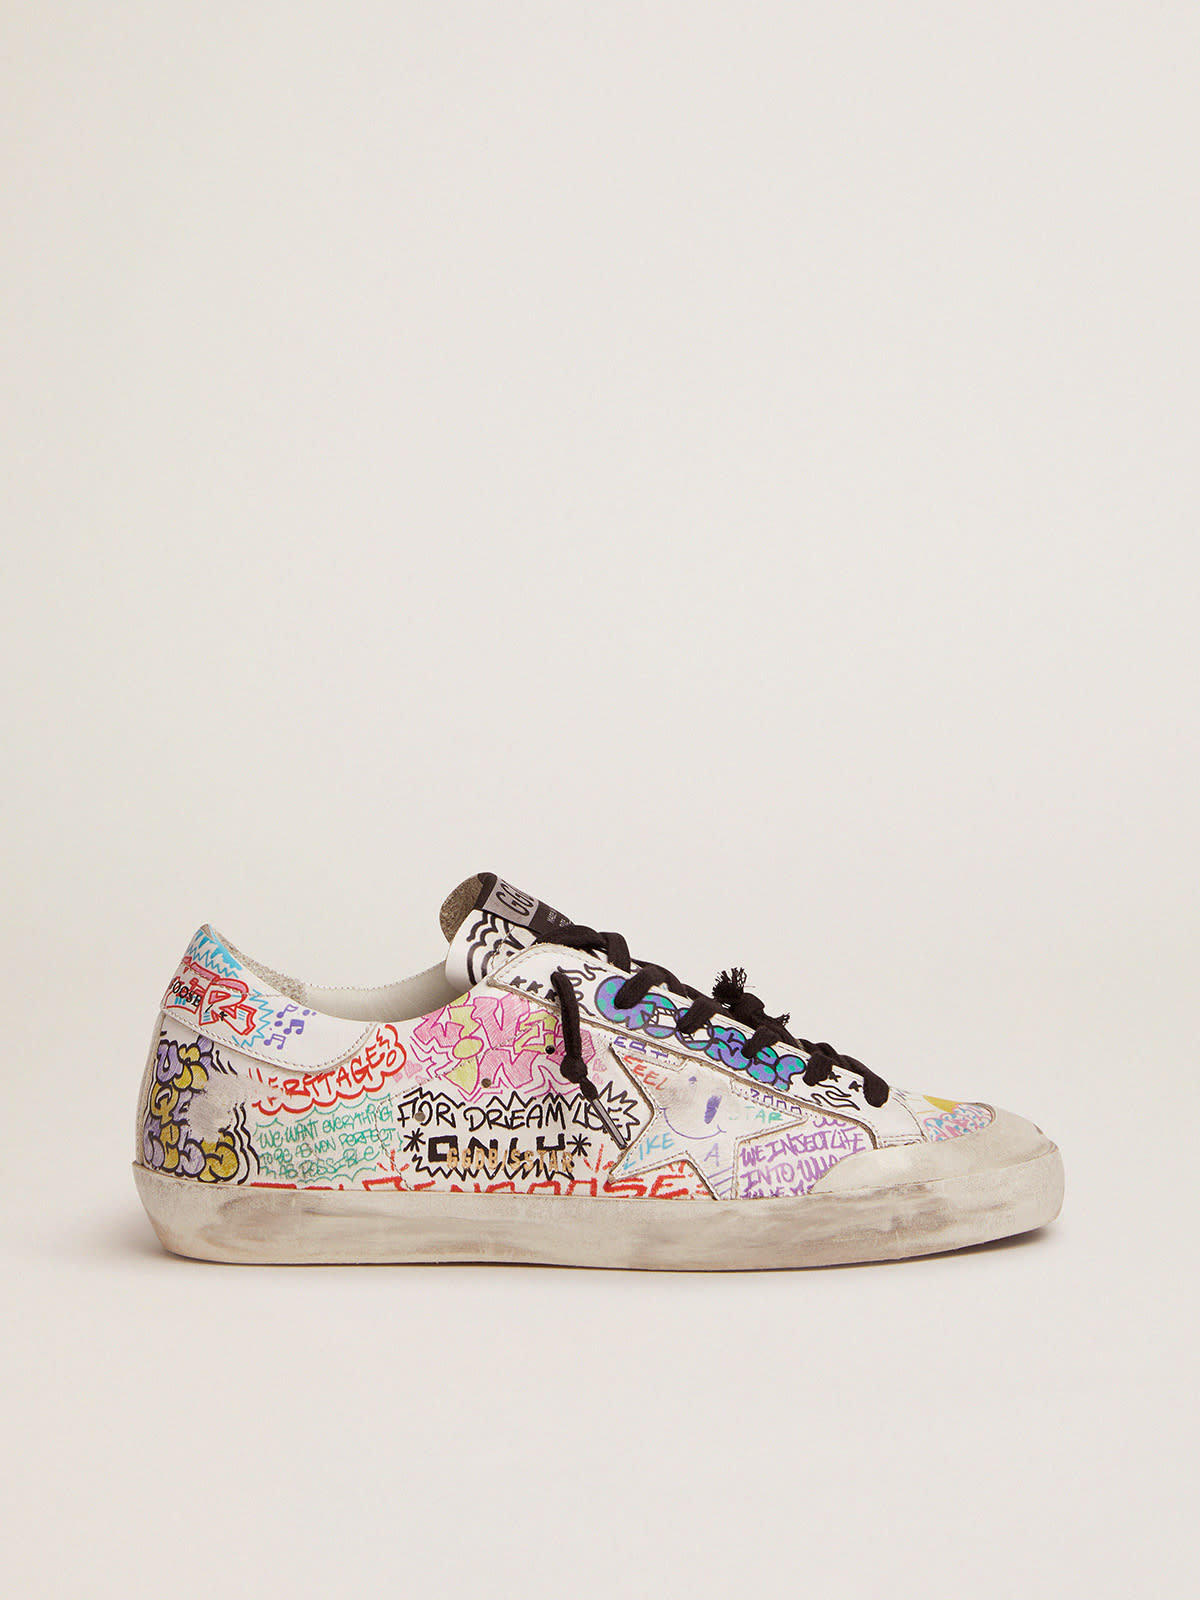 sneakers white leather with graffiti print | Golden